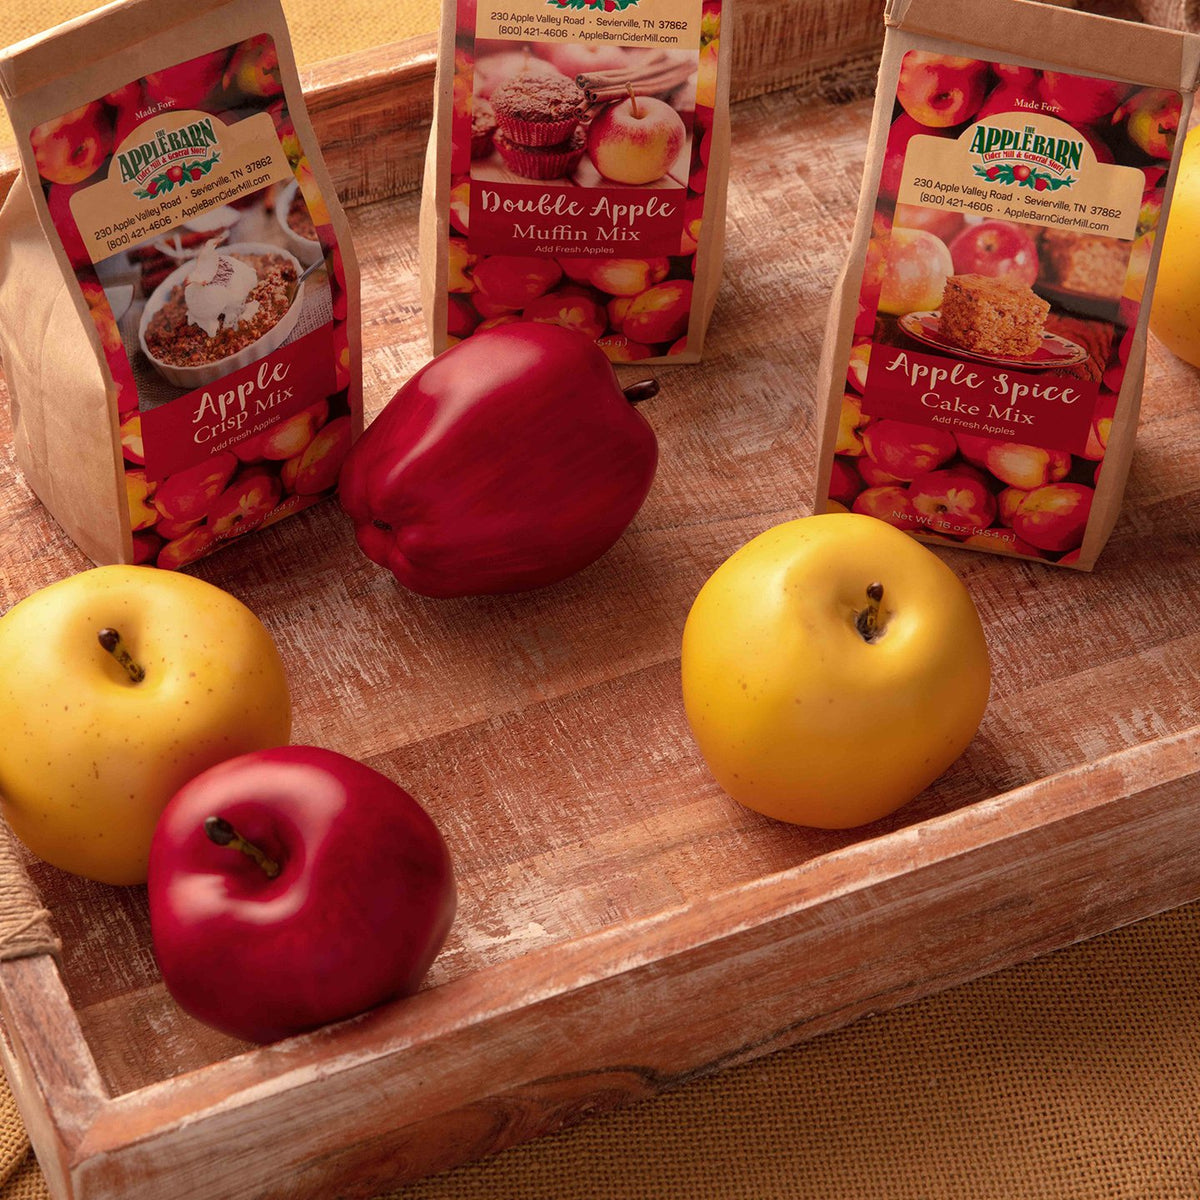 Apple crisp mix bags with apples